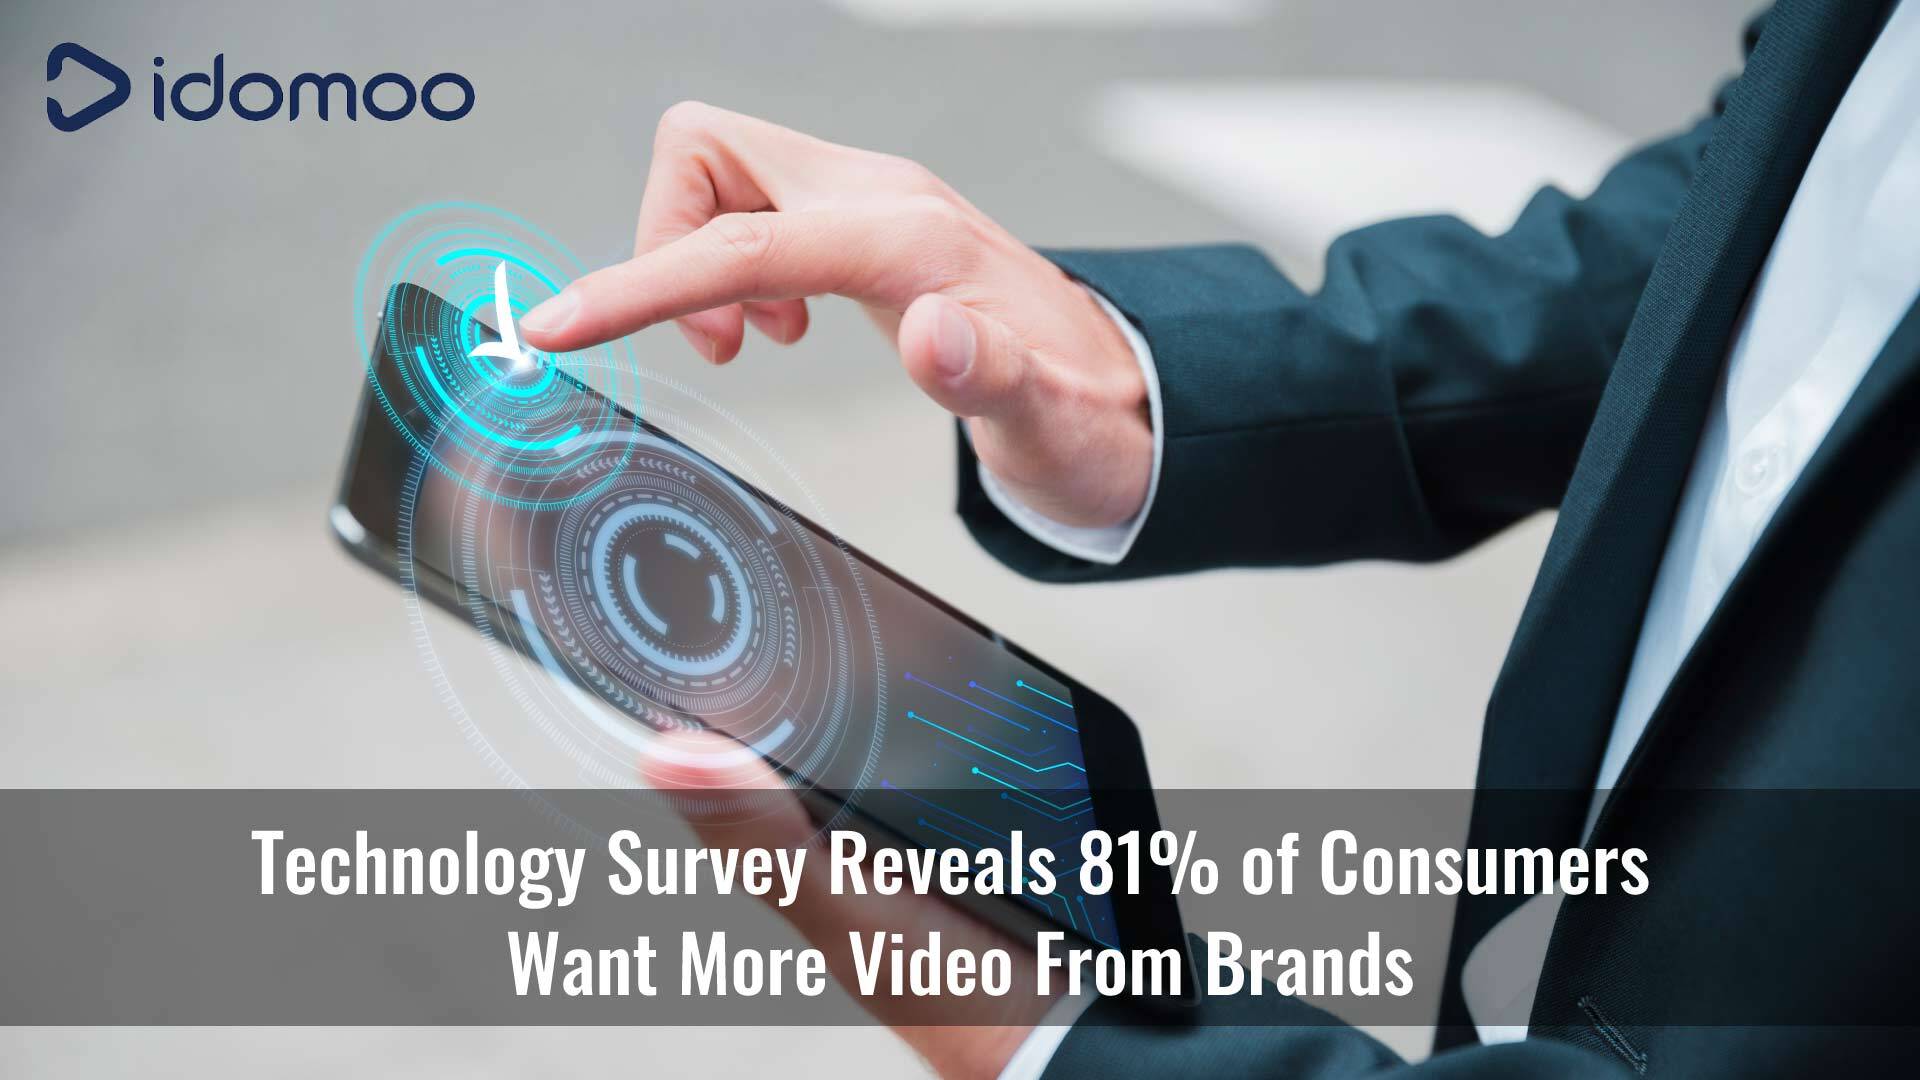 State of Video Technology Survey Reveals 81% of Consumers Want More Video From Brands